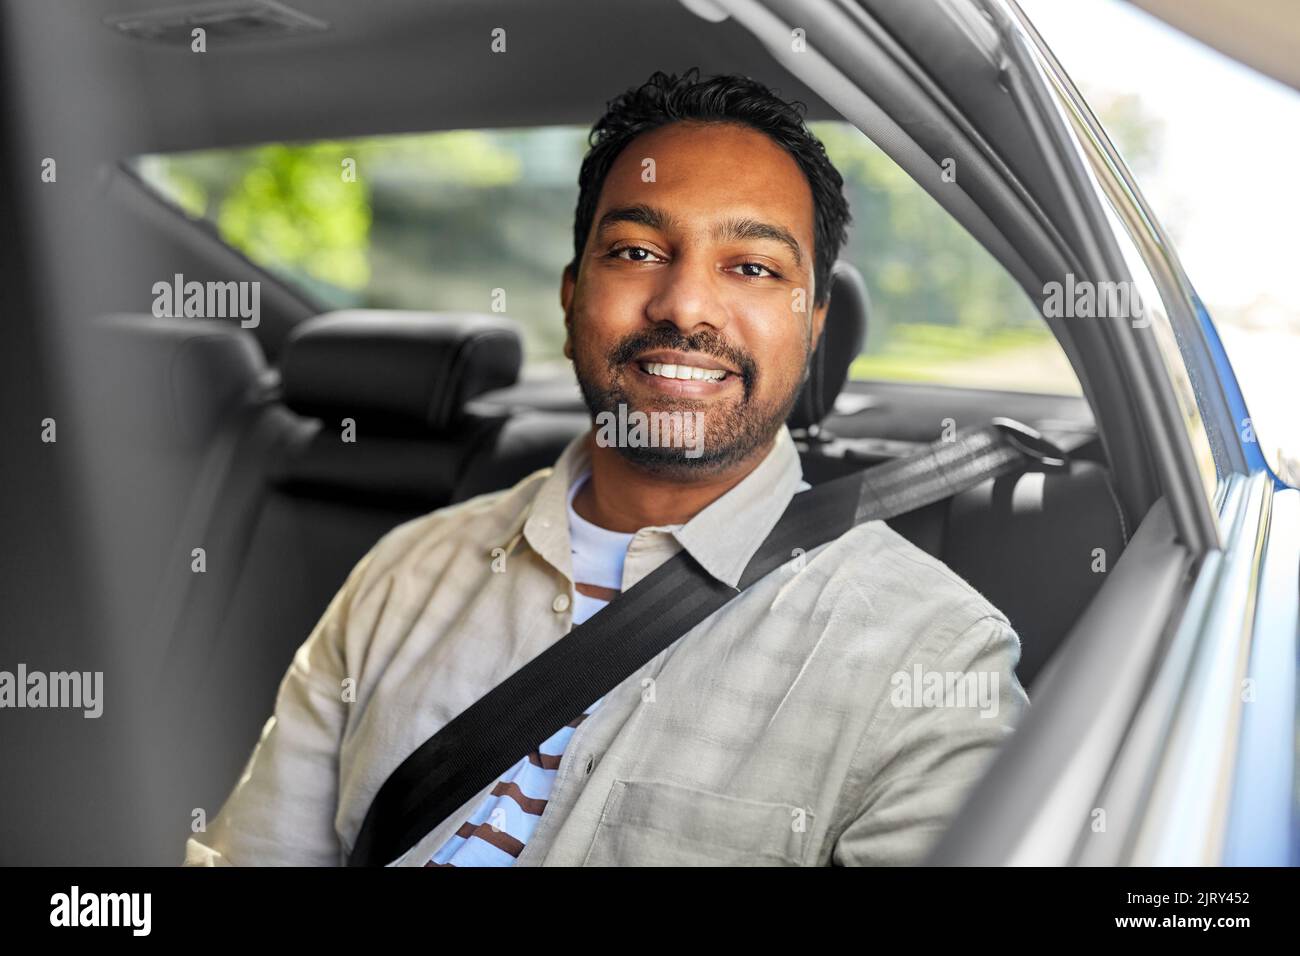 smiling indian male passenger in taxi car Stock Photo